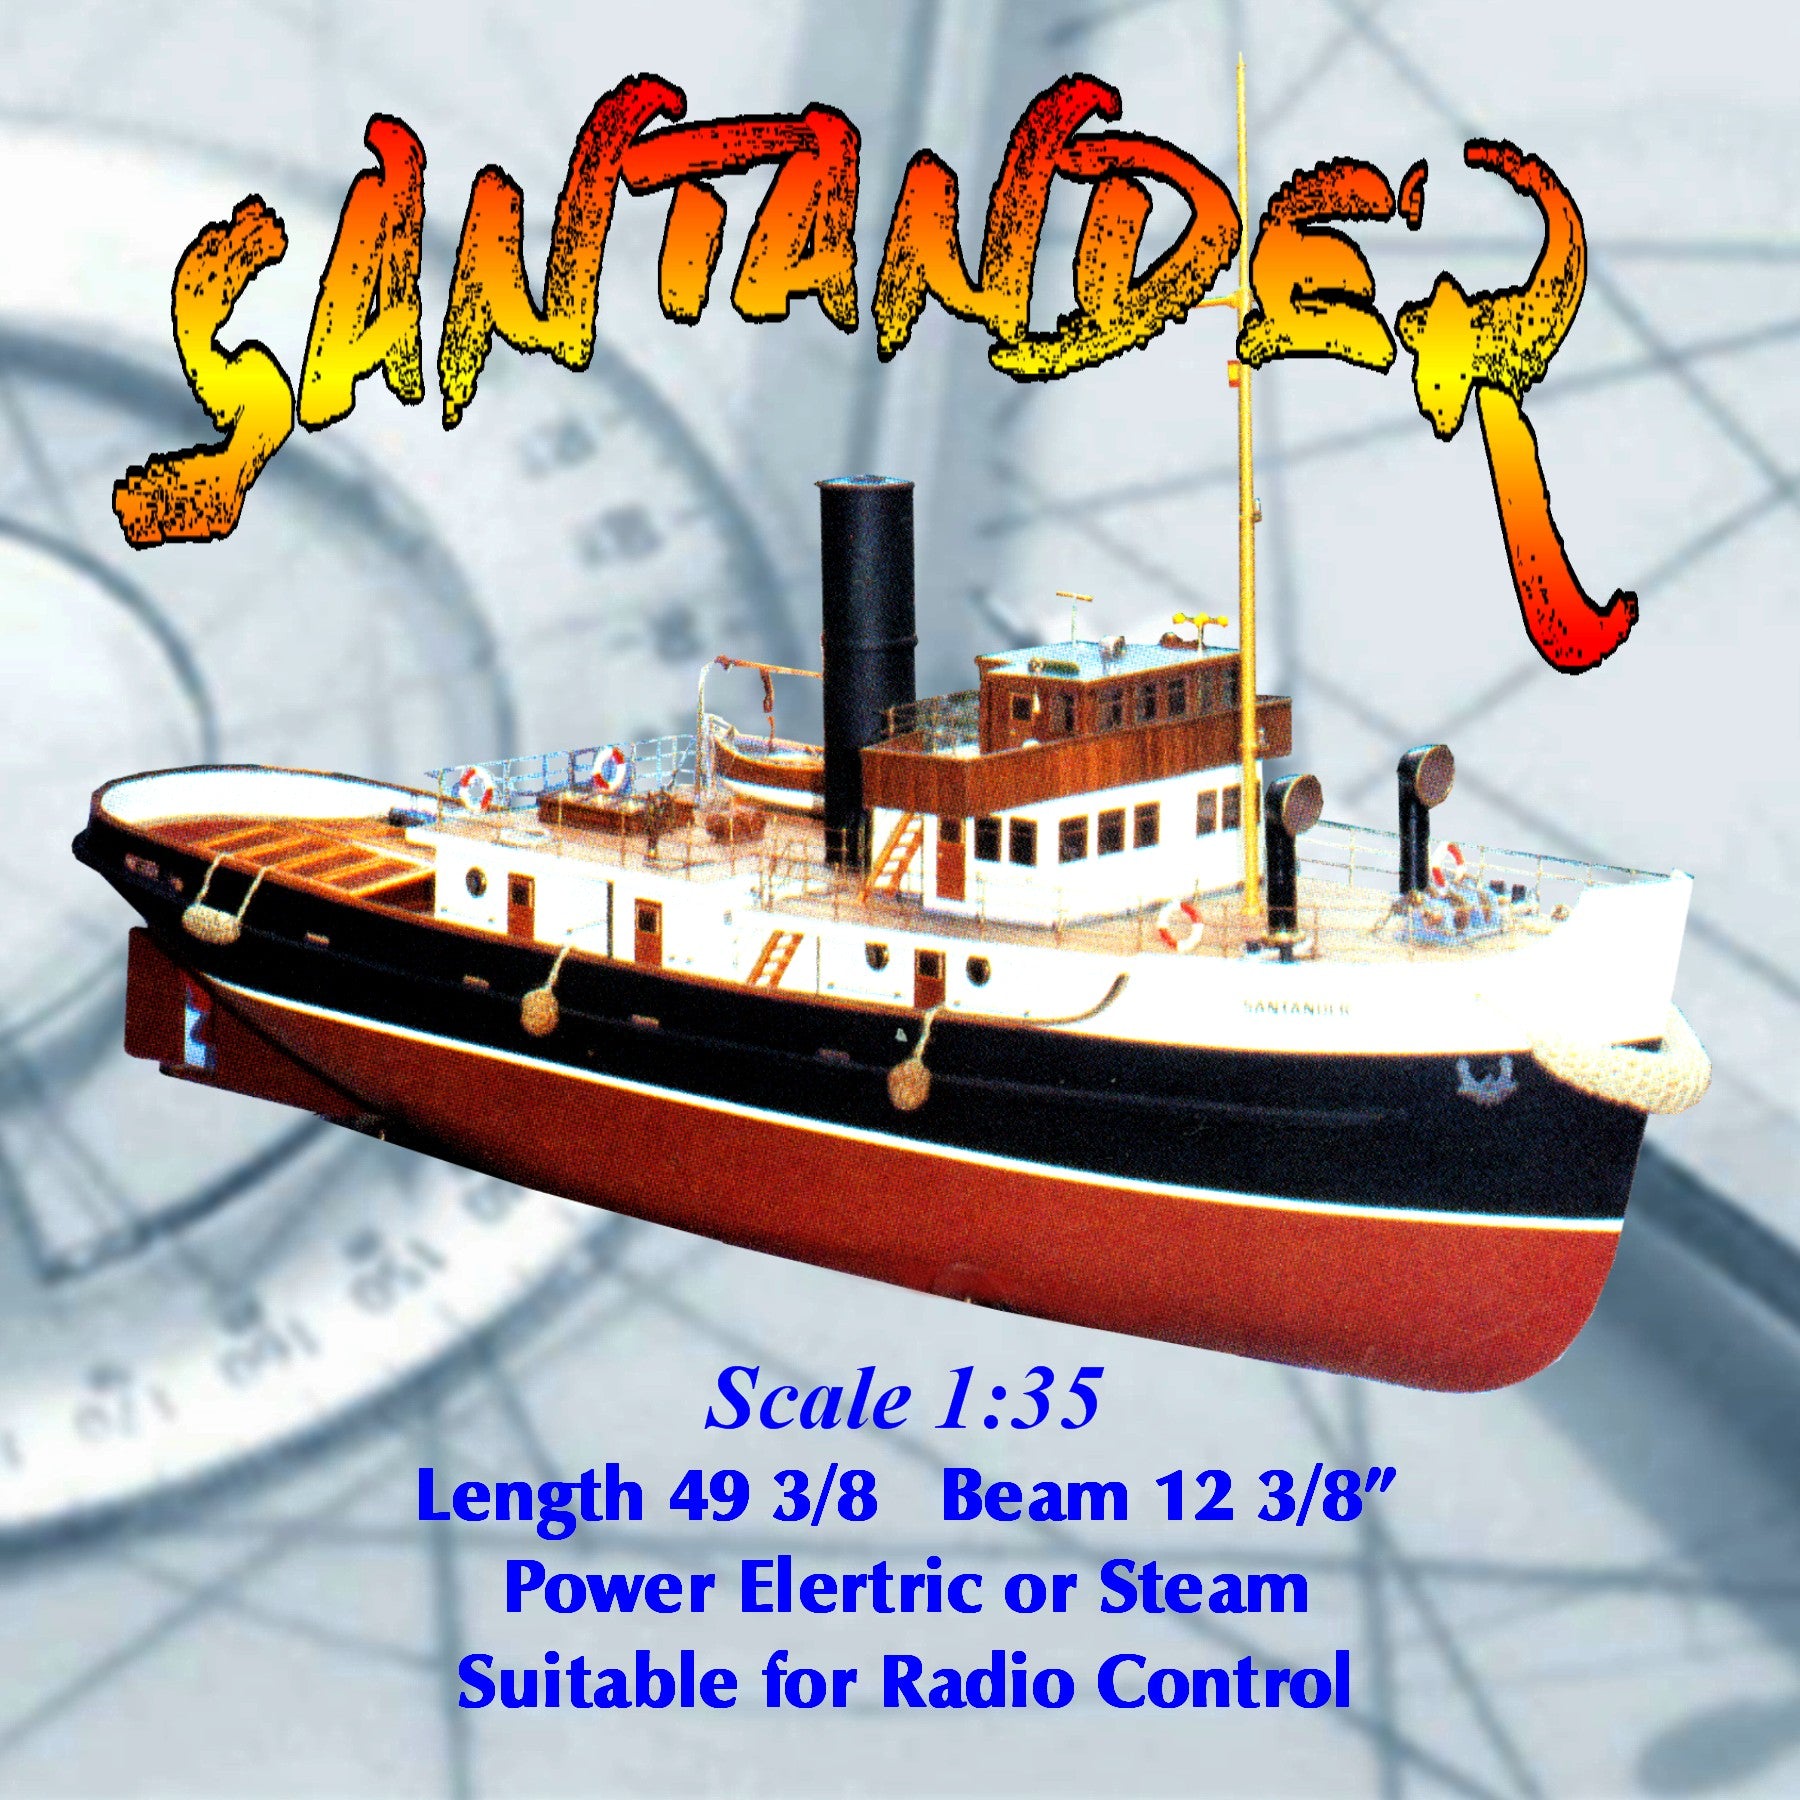 full size printed plan scale 1:35 large sea tug santander  electric or steam suitable for radio control